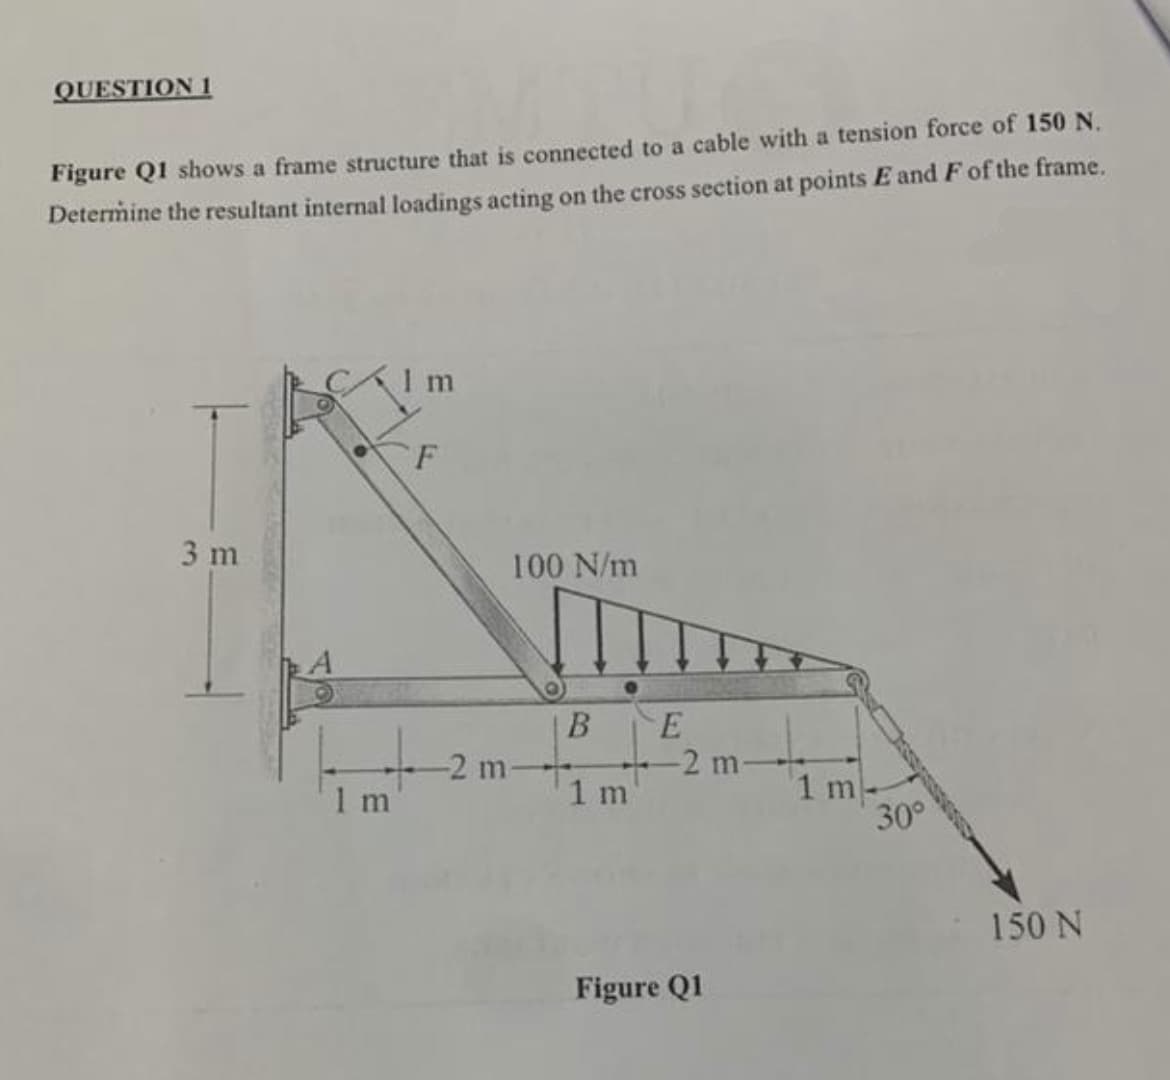 QUESTION 1
Figure Q1 shows a frame structure that is connected to a cable with a tension force of 150 N.
Determine the resultant internal loadings acting on the cross section at points E and F of the frame.
3 m
1 m
I m
F
100 N/m
B
E
-2 m-
-2 m-
1 m
1 m
30°
Figure Q1
150 N